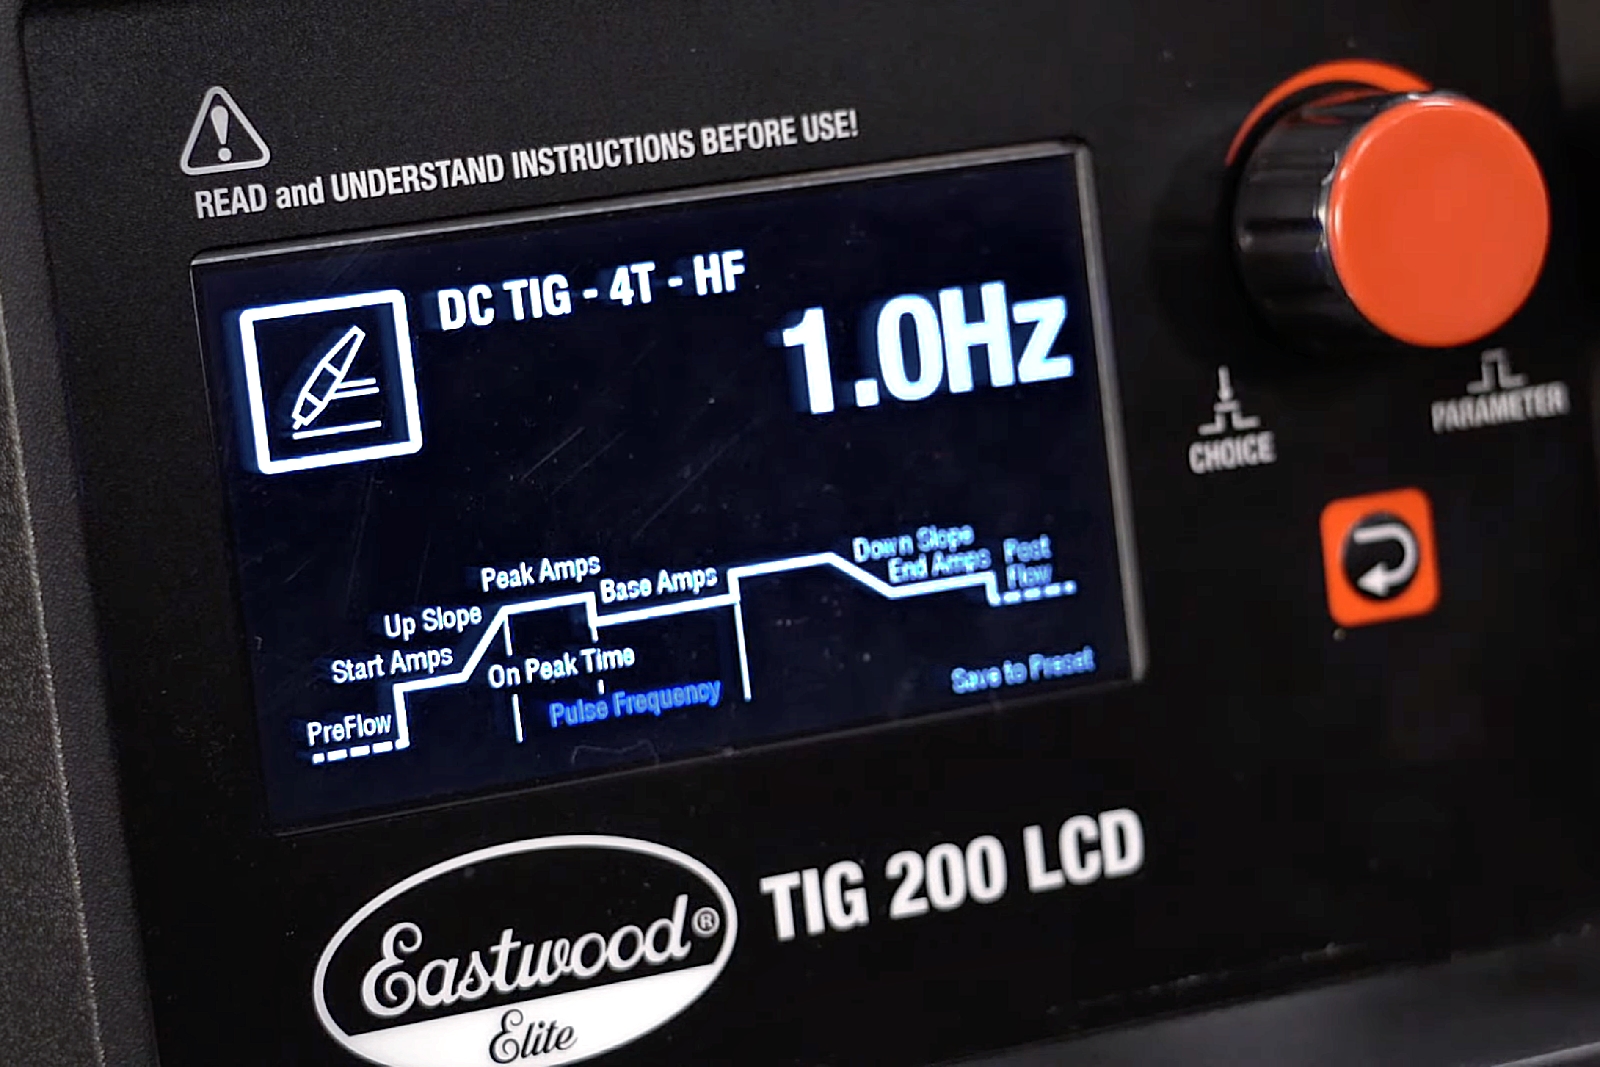 eastwood elite tig 200 lcd pulse frequency